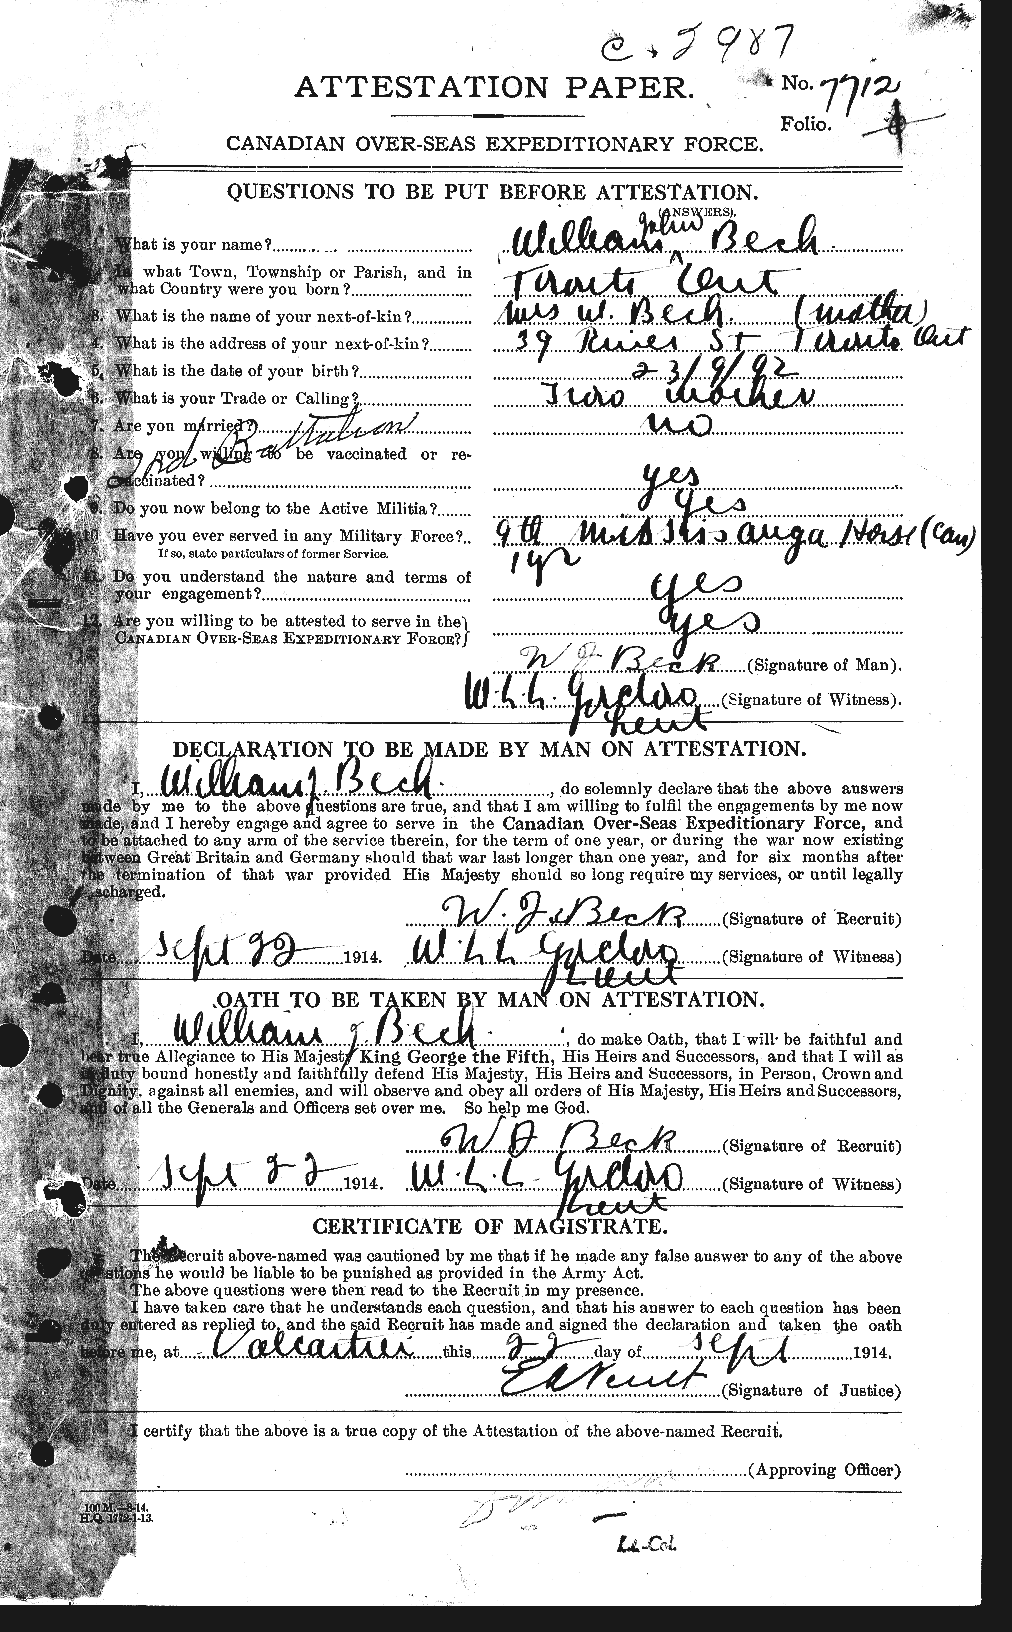 Personnel Records of the First World War - CEF 232250a